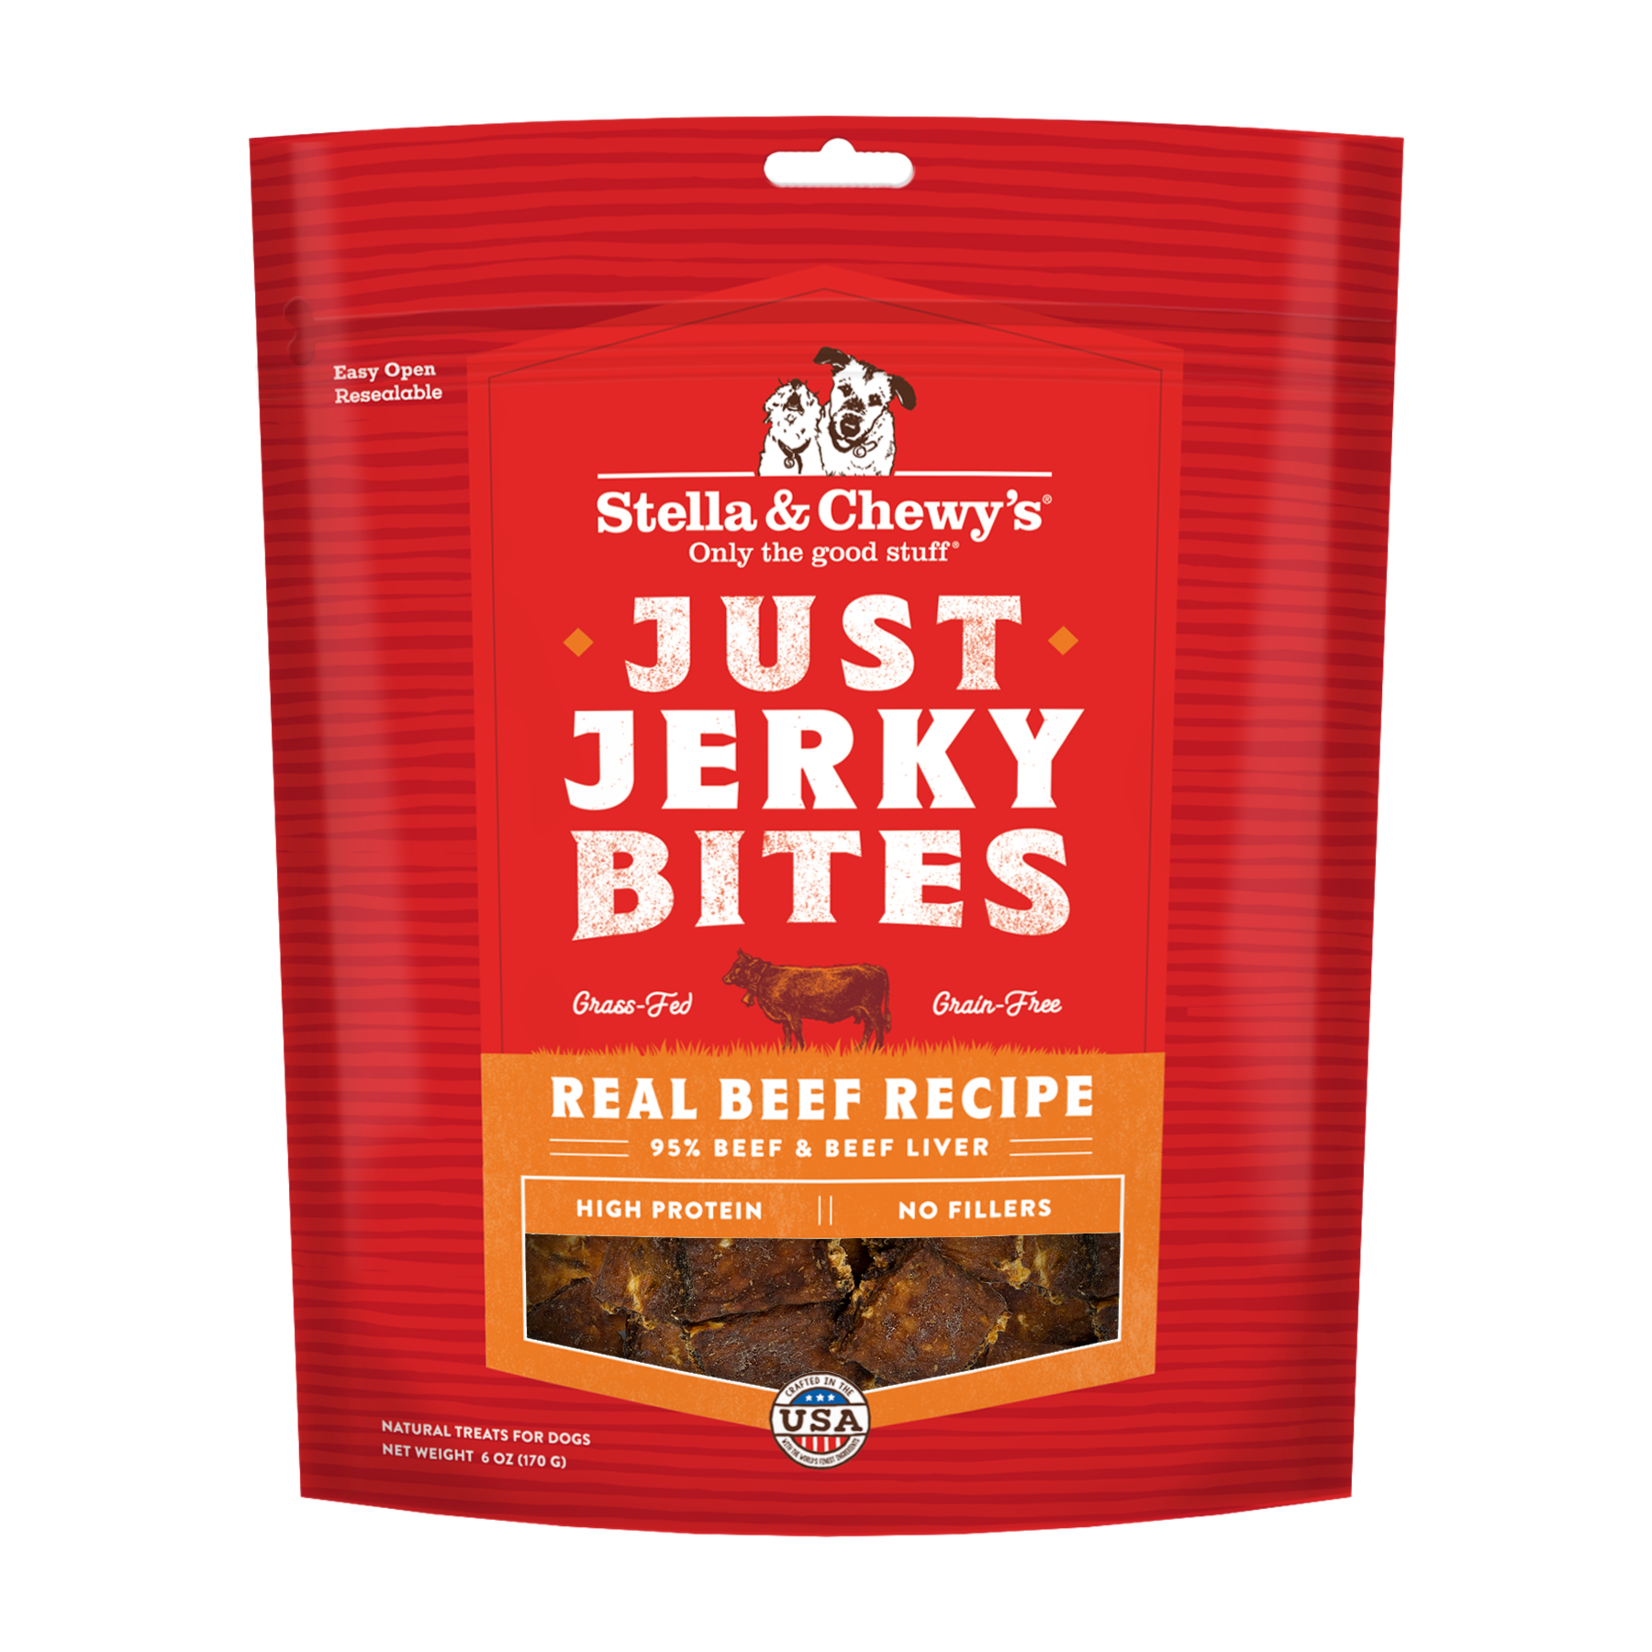 Stella & Chewy's Stella & Chewy's Just Jerky Bites